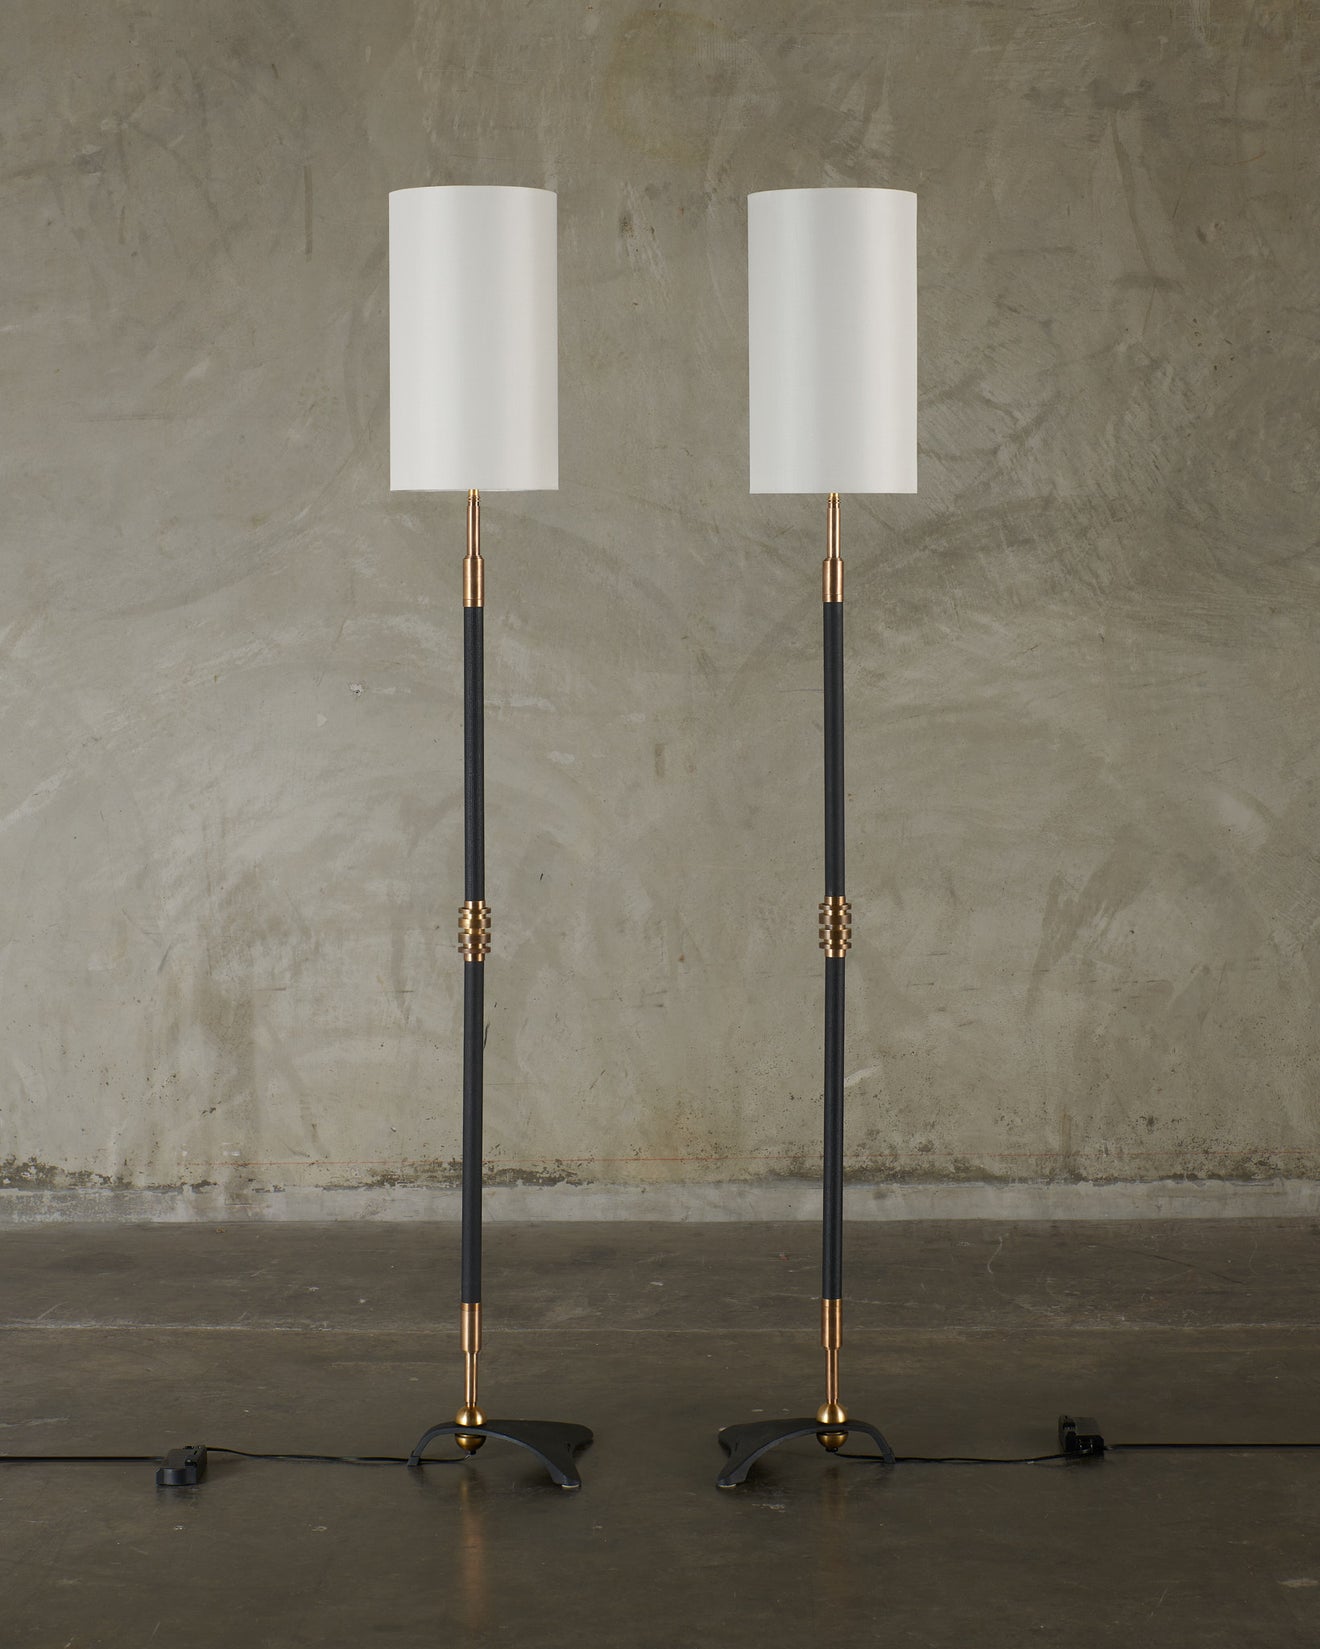 PAIR OF JACQUES LE FATALISTE FLOOR LAMPS BY GIANNI VALLINO